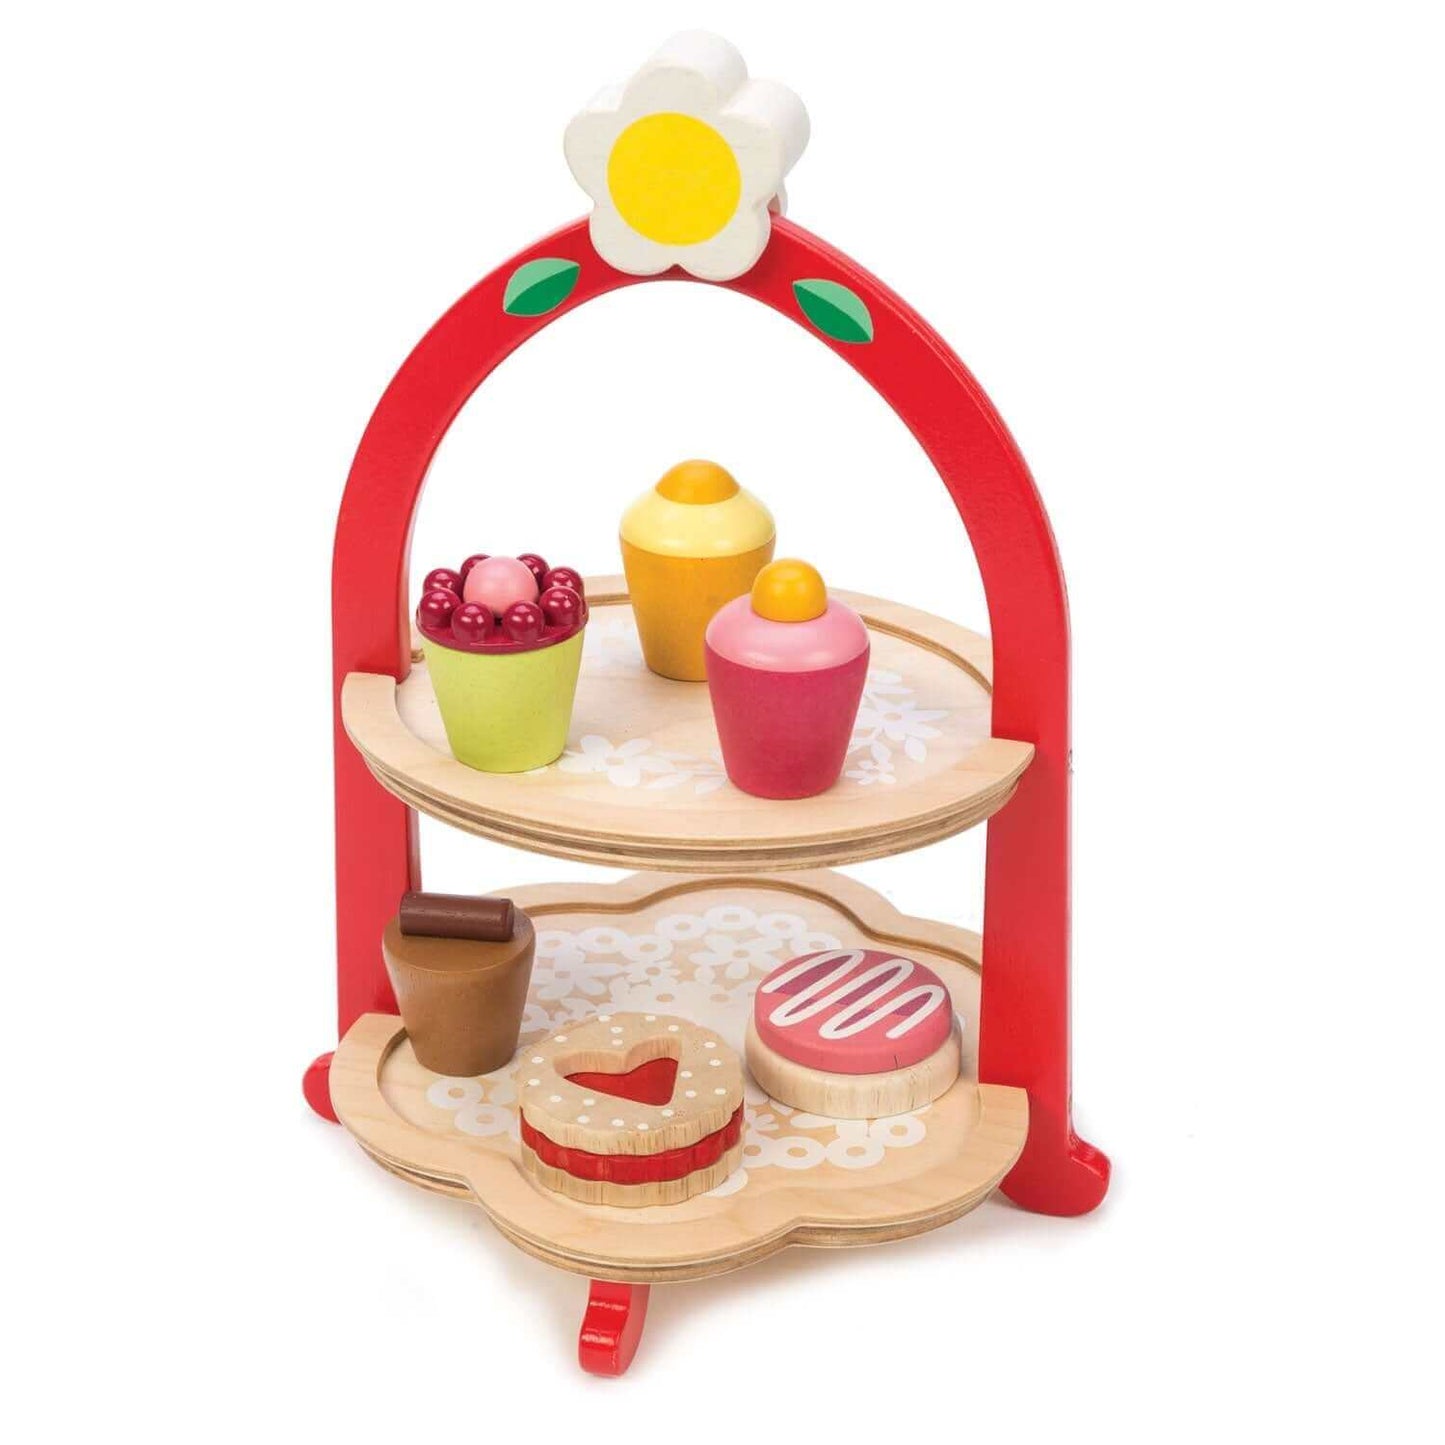 Afternoon Tea Stand and Cookies, Tender Leaf Toys, eco-friendly Toys, Mountain Kids Toys